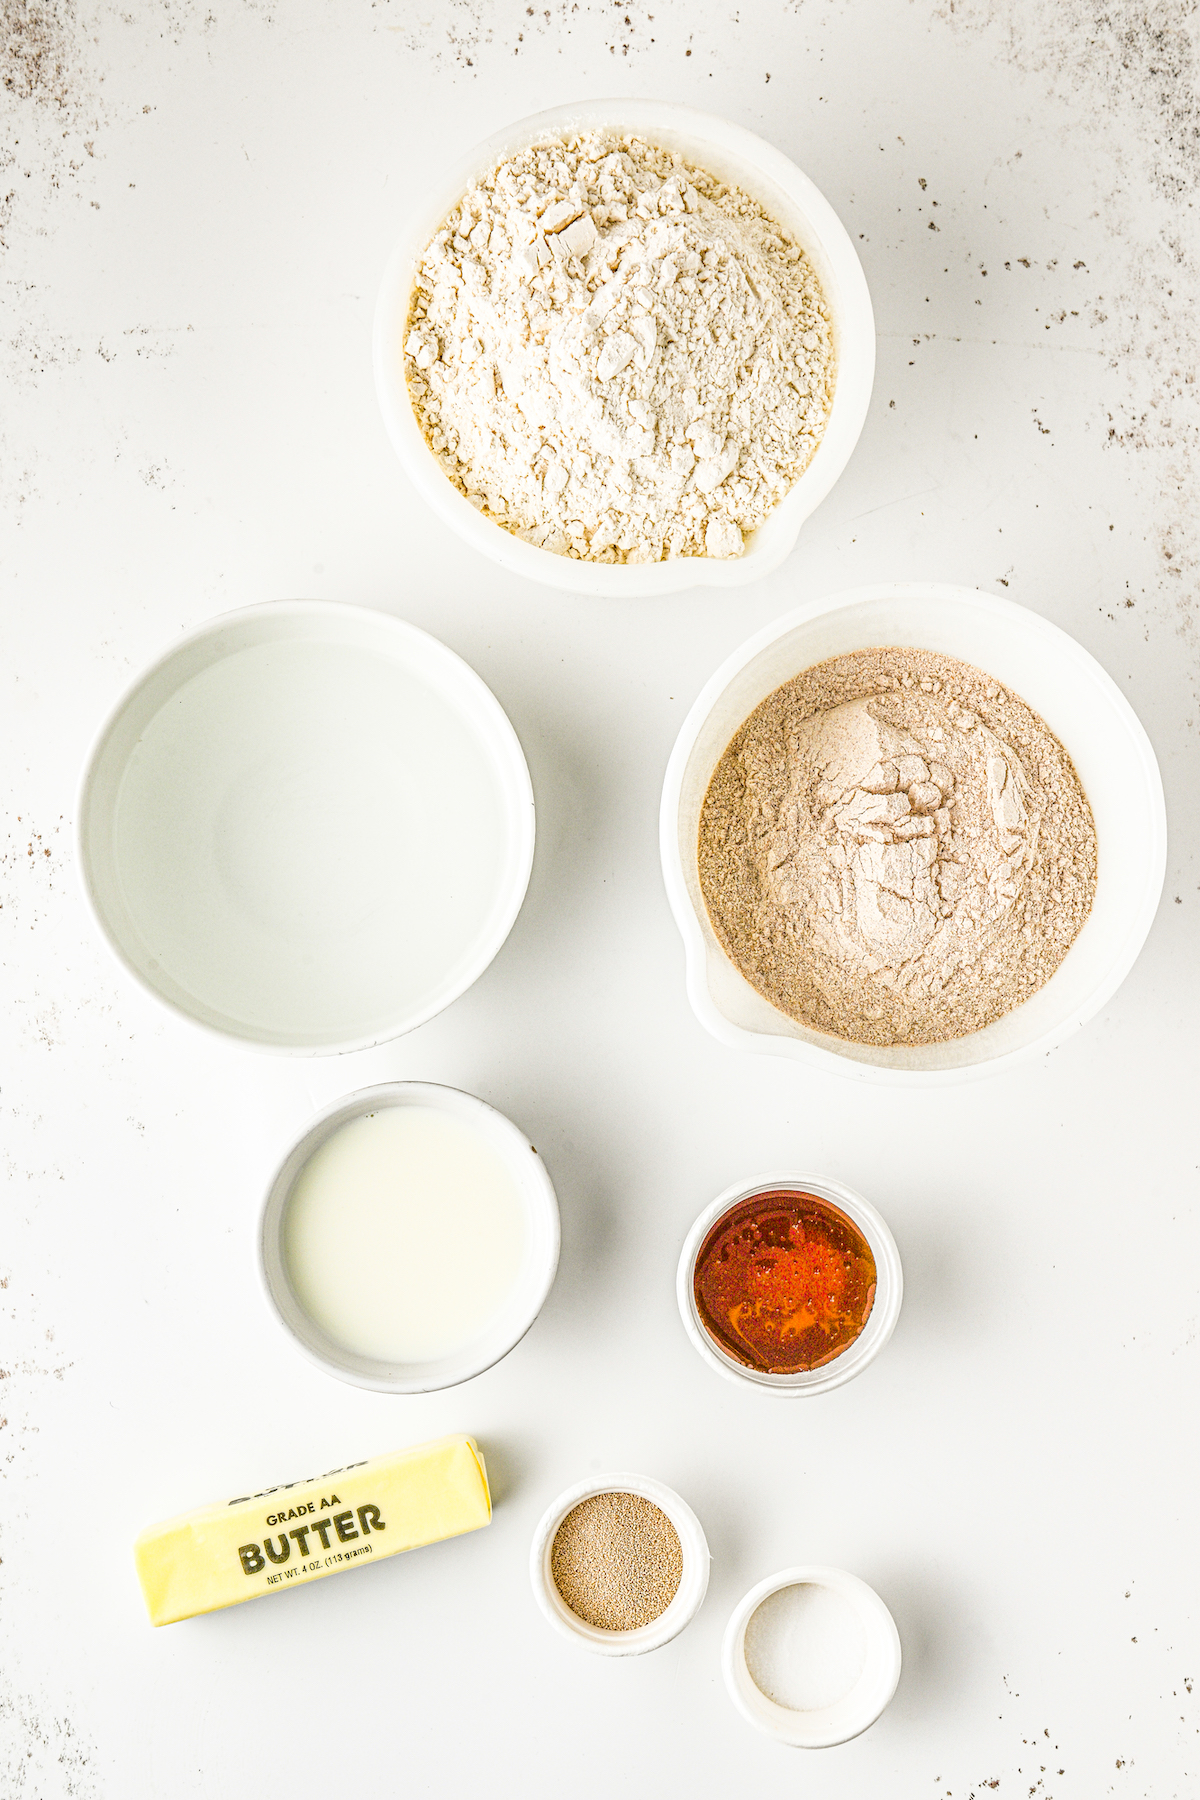 Ingredients for bread, measured and arranged on a table.